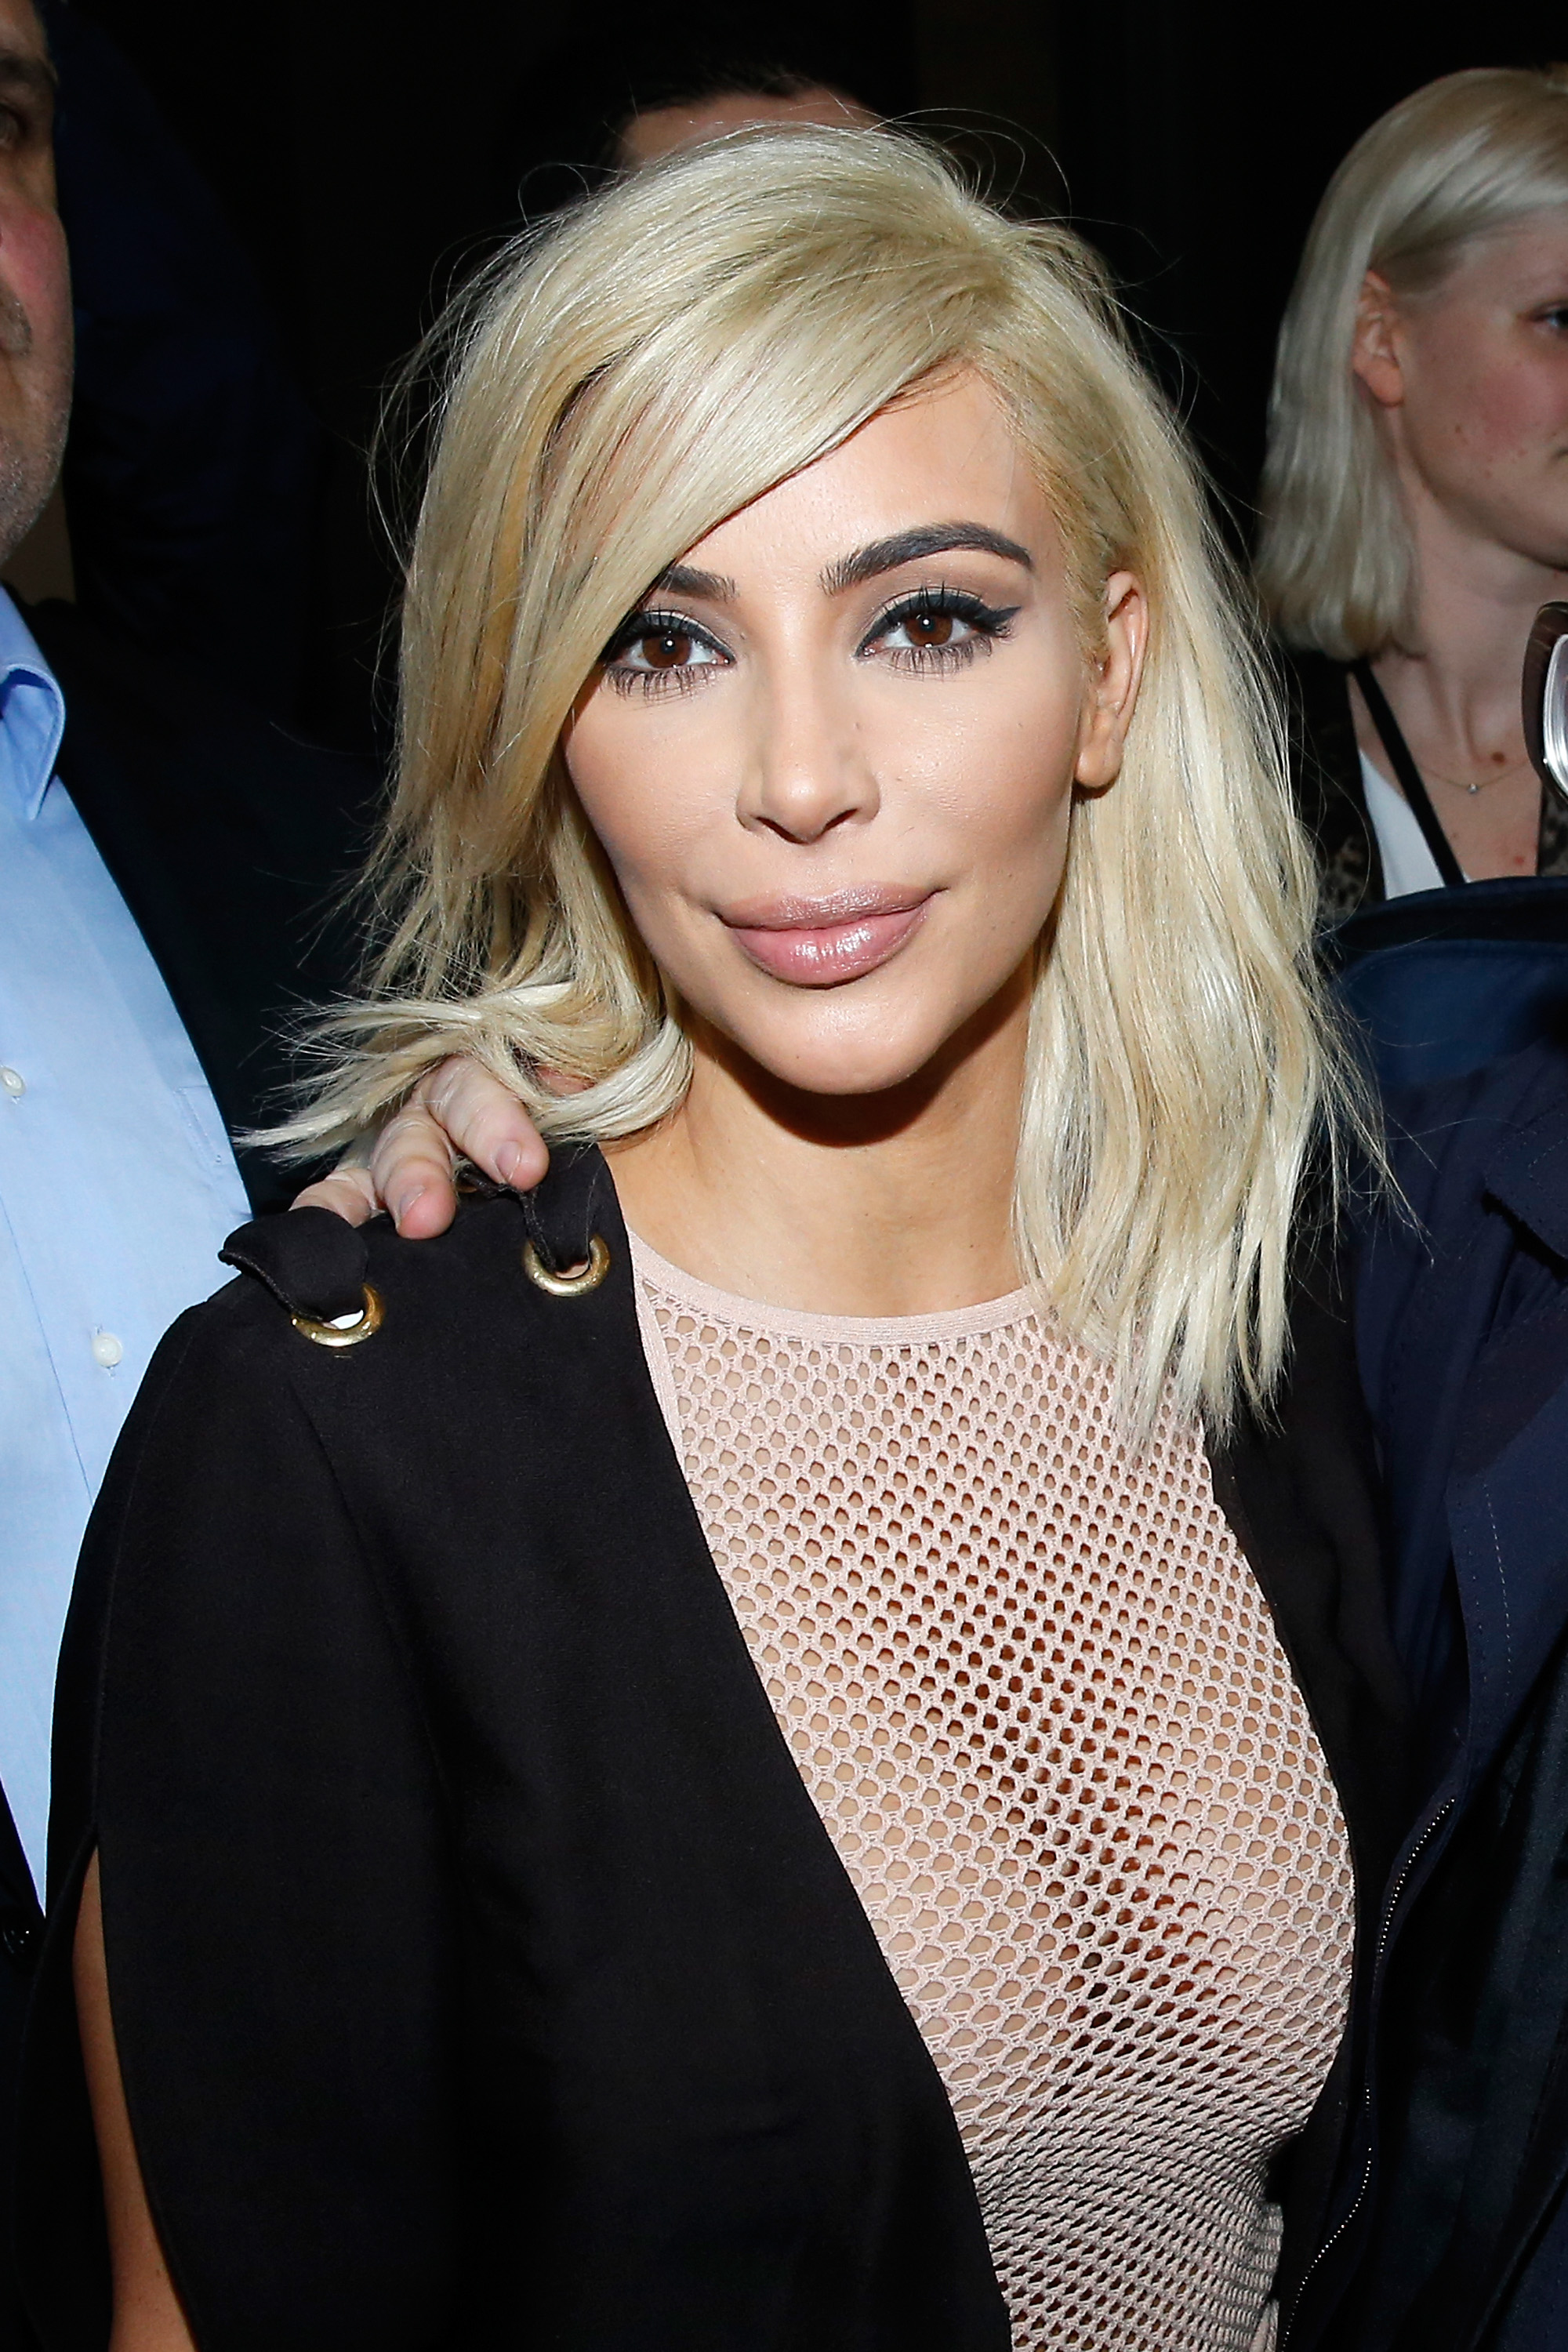 Kim Kardashian Goes Blonde in Behind-the-Scenes Clips of Photo Shoot